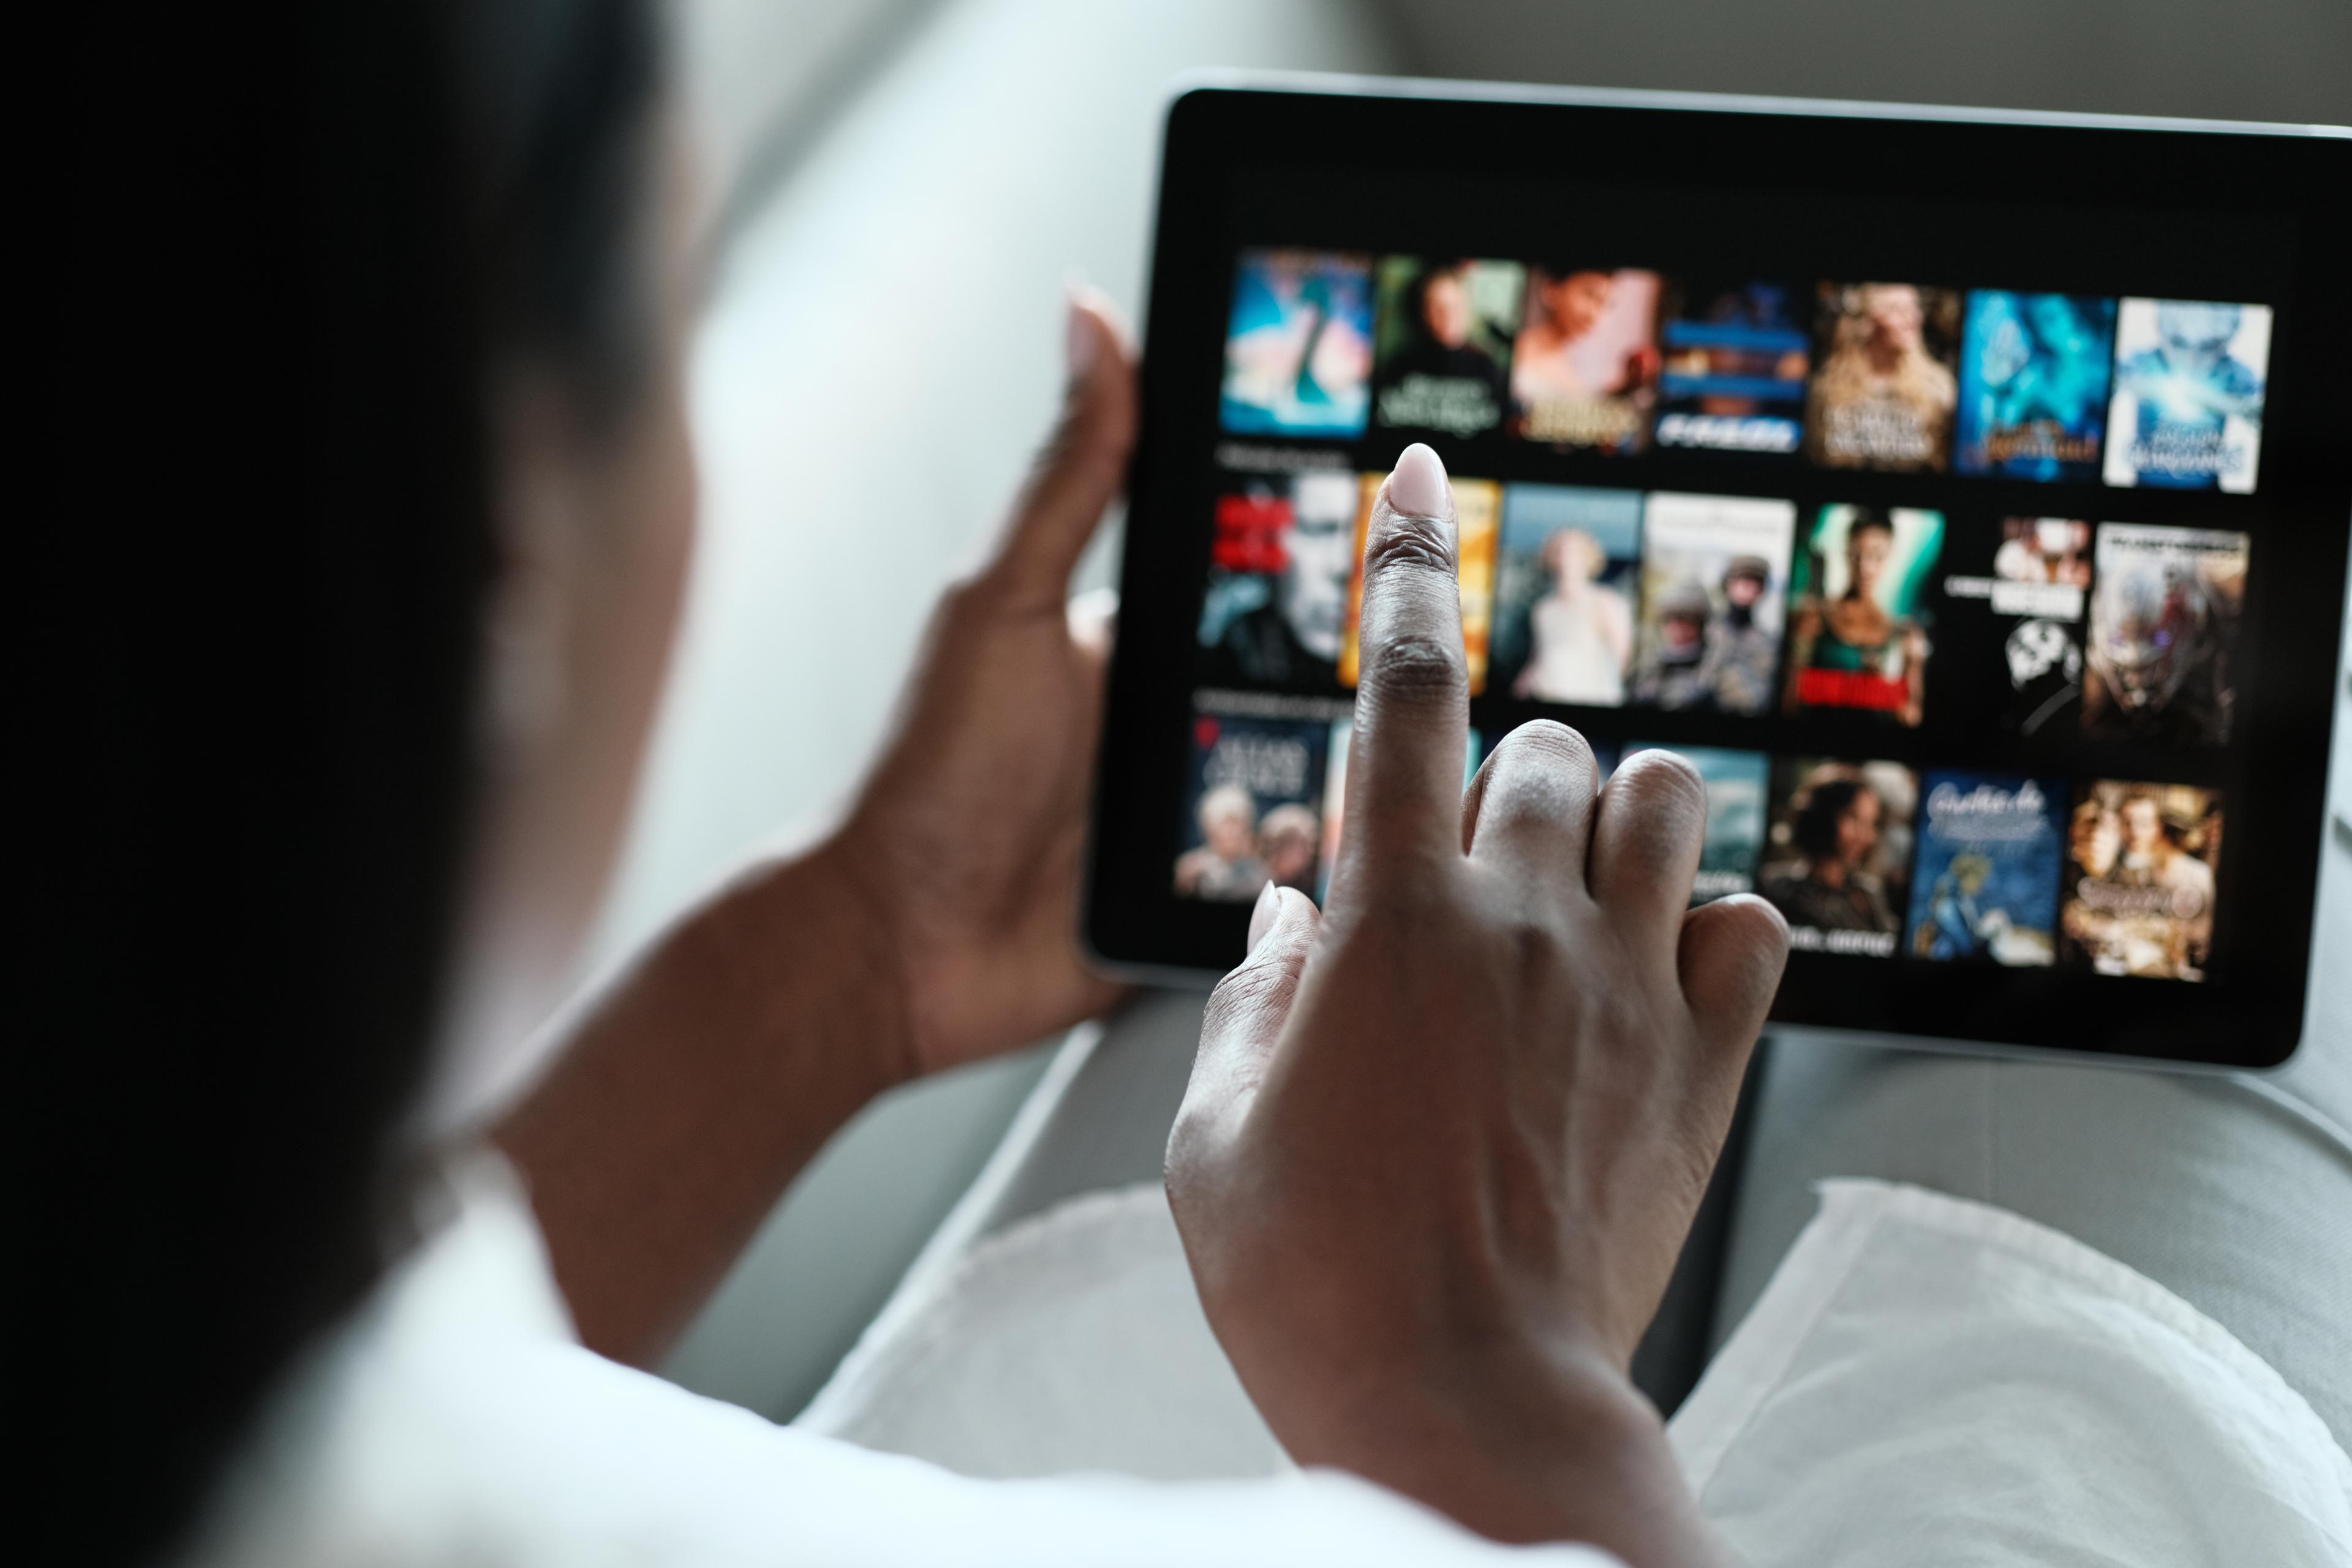 A person's finger hovers over a touchscreen, poised to select a streaming service for entertainment. The screen displays various streaming service logos, suggesting a multitude of options for viewing content on an electronic device.